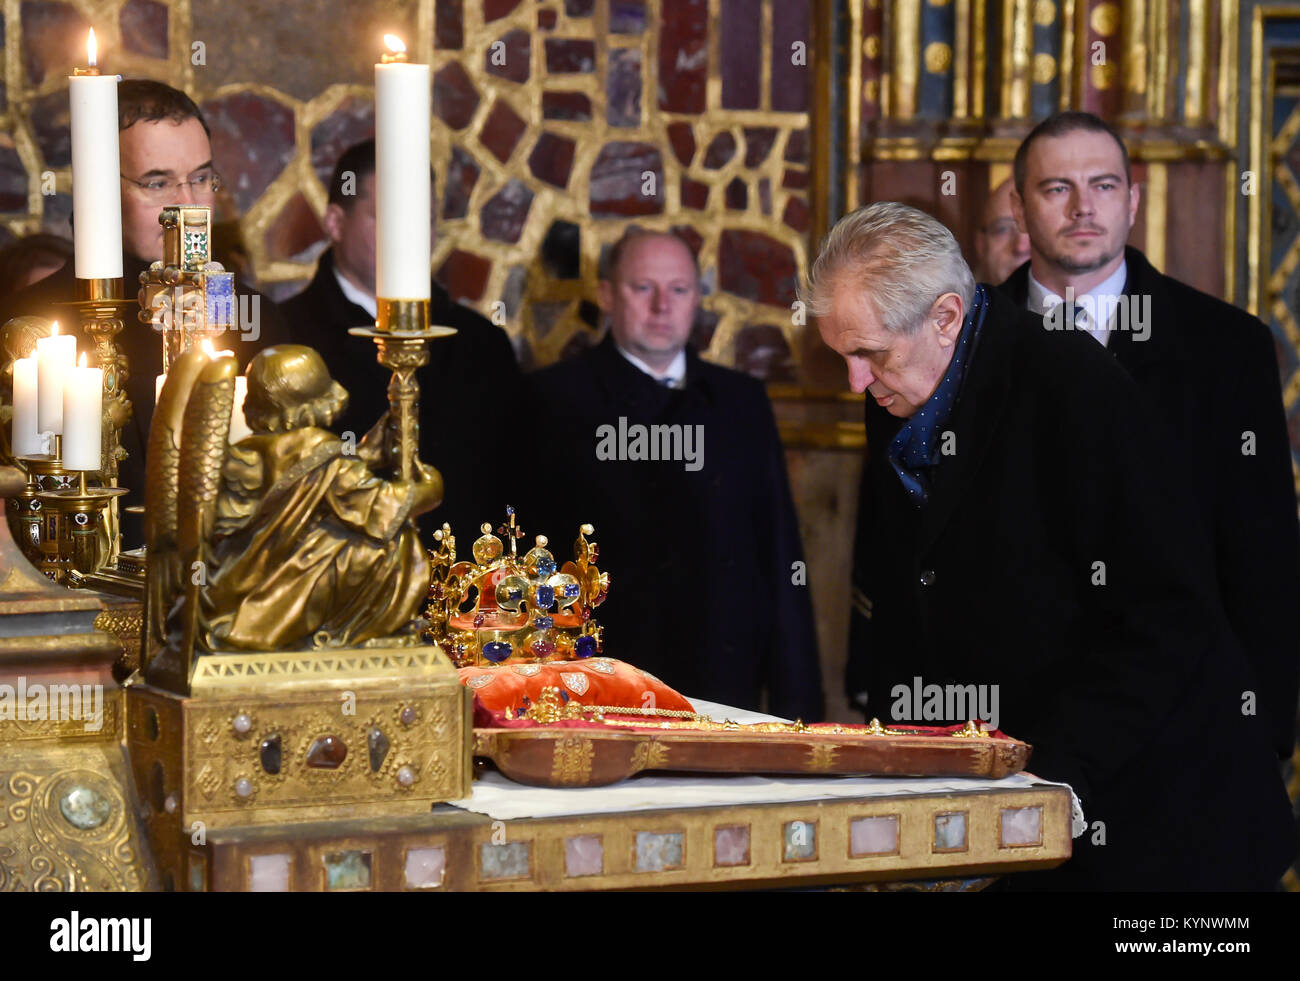 Prague Castle, Czech Republic. 15th Jan, 2018. Czech President Milos Zeman (2nd from right) and other six key holders unlocked chamber with crown jewels in St. Vitus Cathedral at Prague Castle, Czech Republic, on Monday, January 15, 2018. They will be displayed there as of Tuesday. Credit: Vit Simanek/CTK Photo/Alamy Live News Stock Photo